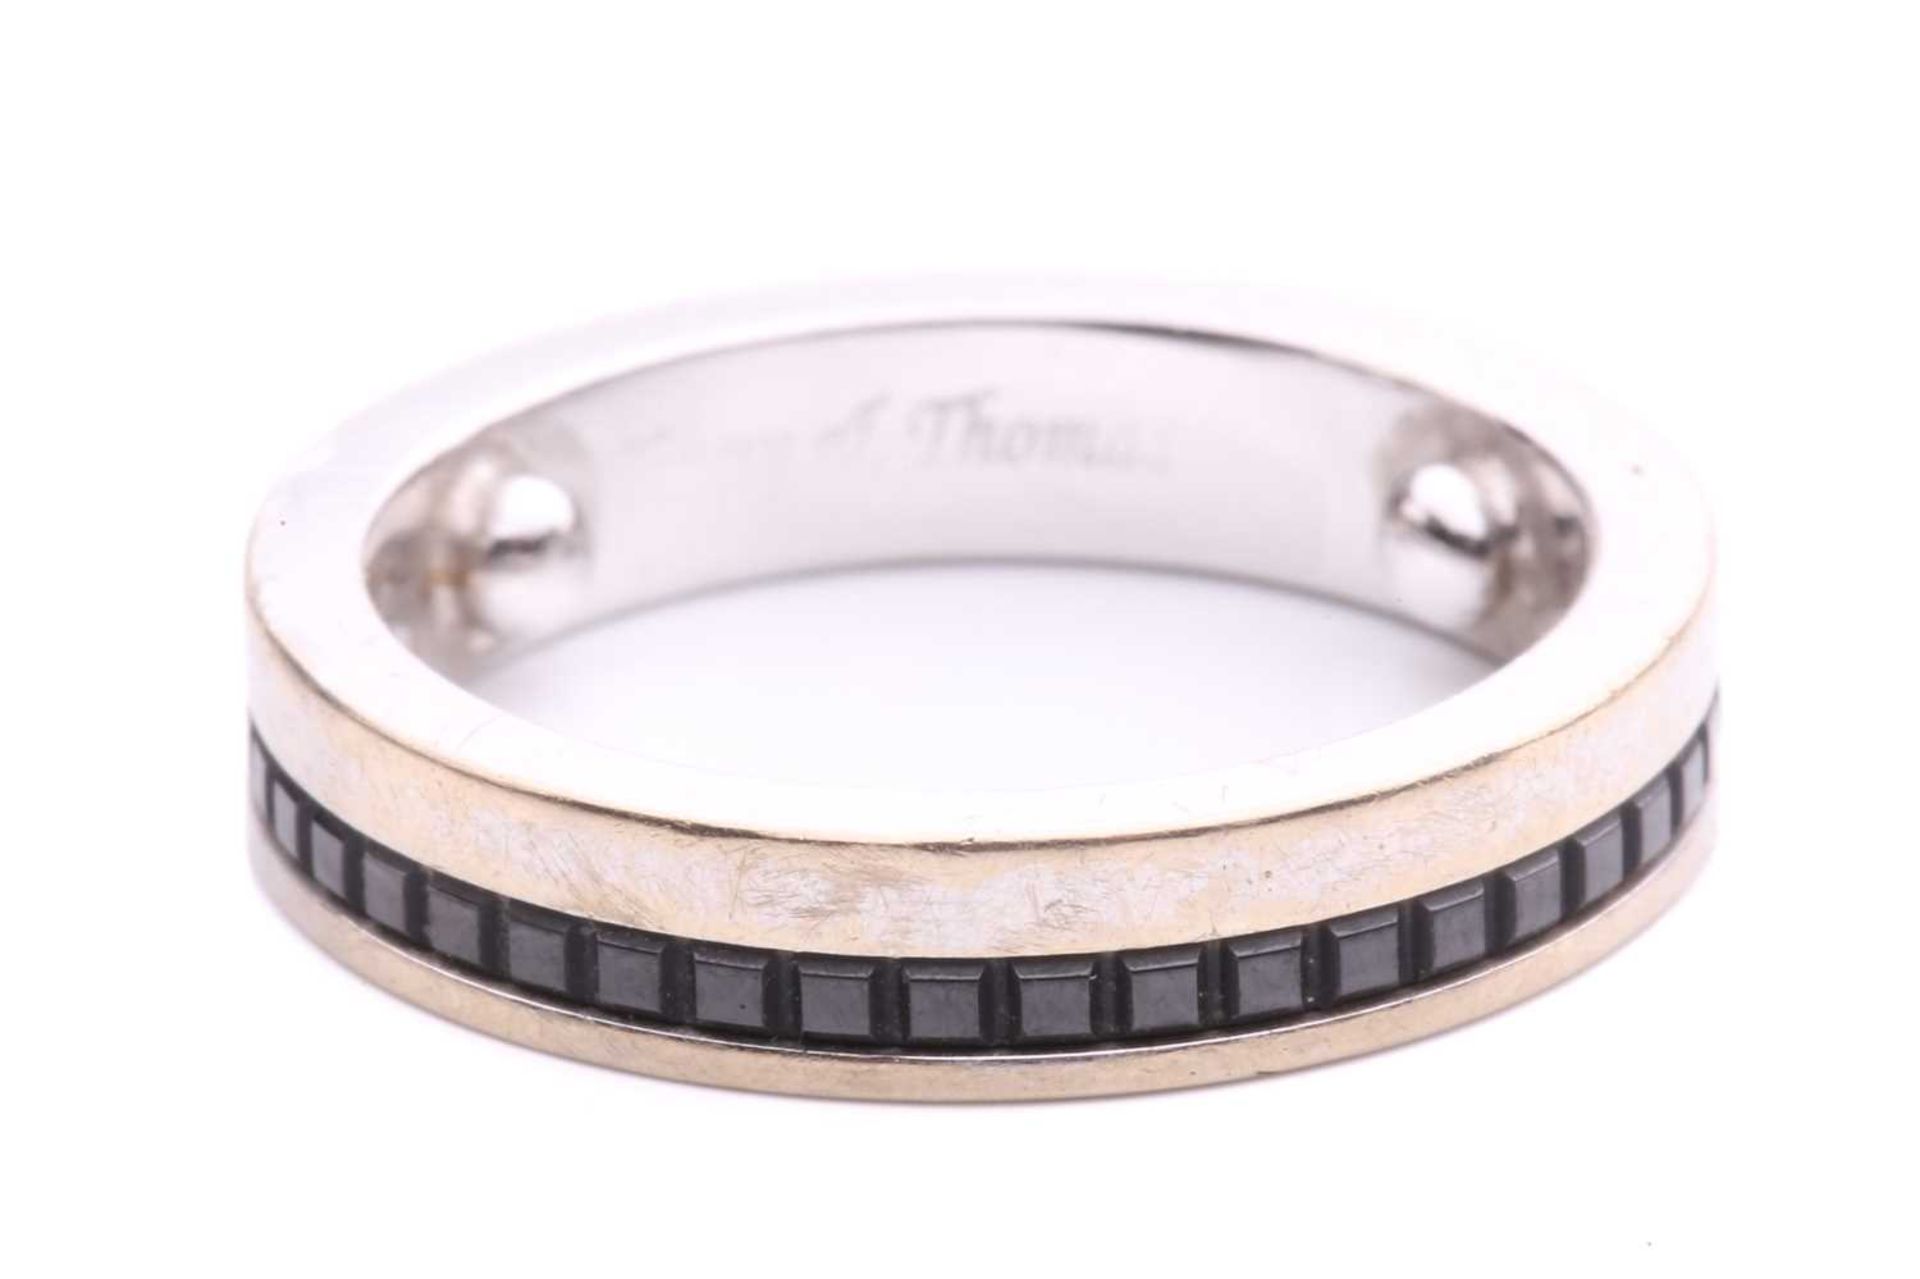 Boucheron - a 'Quatre' black edition wedding band, the polished flat band accented with studded - Image 6 of 6